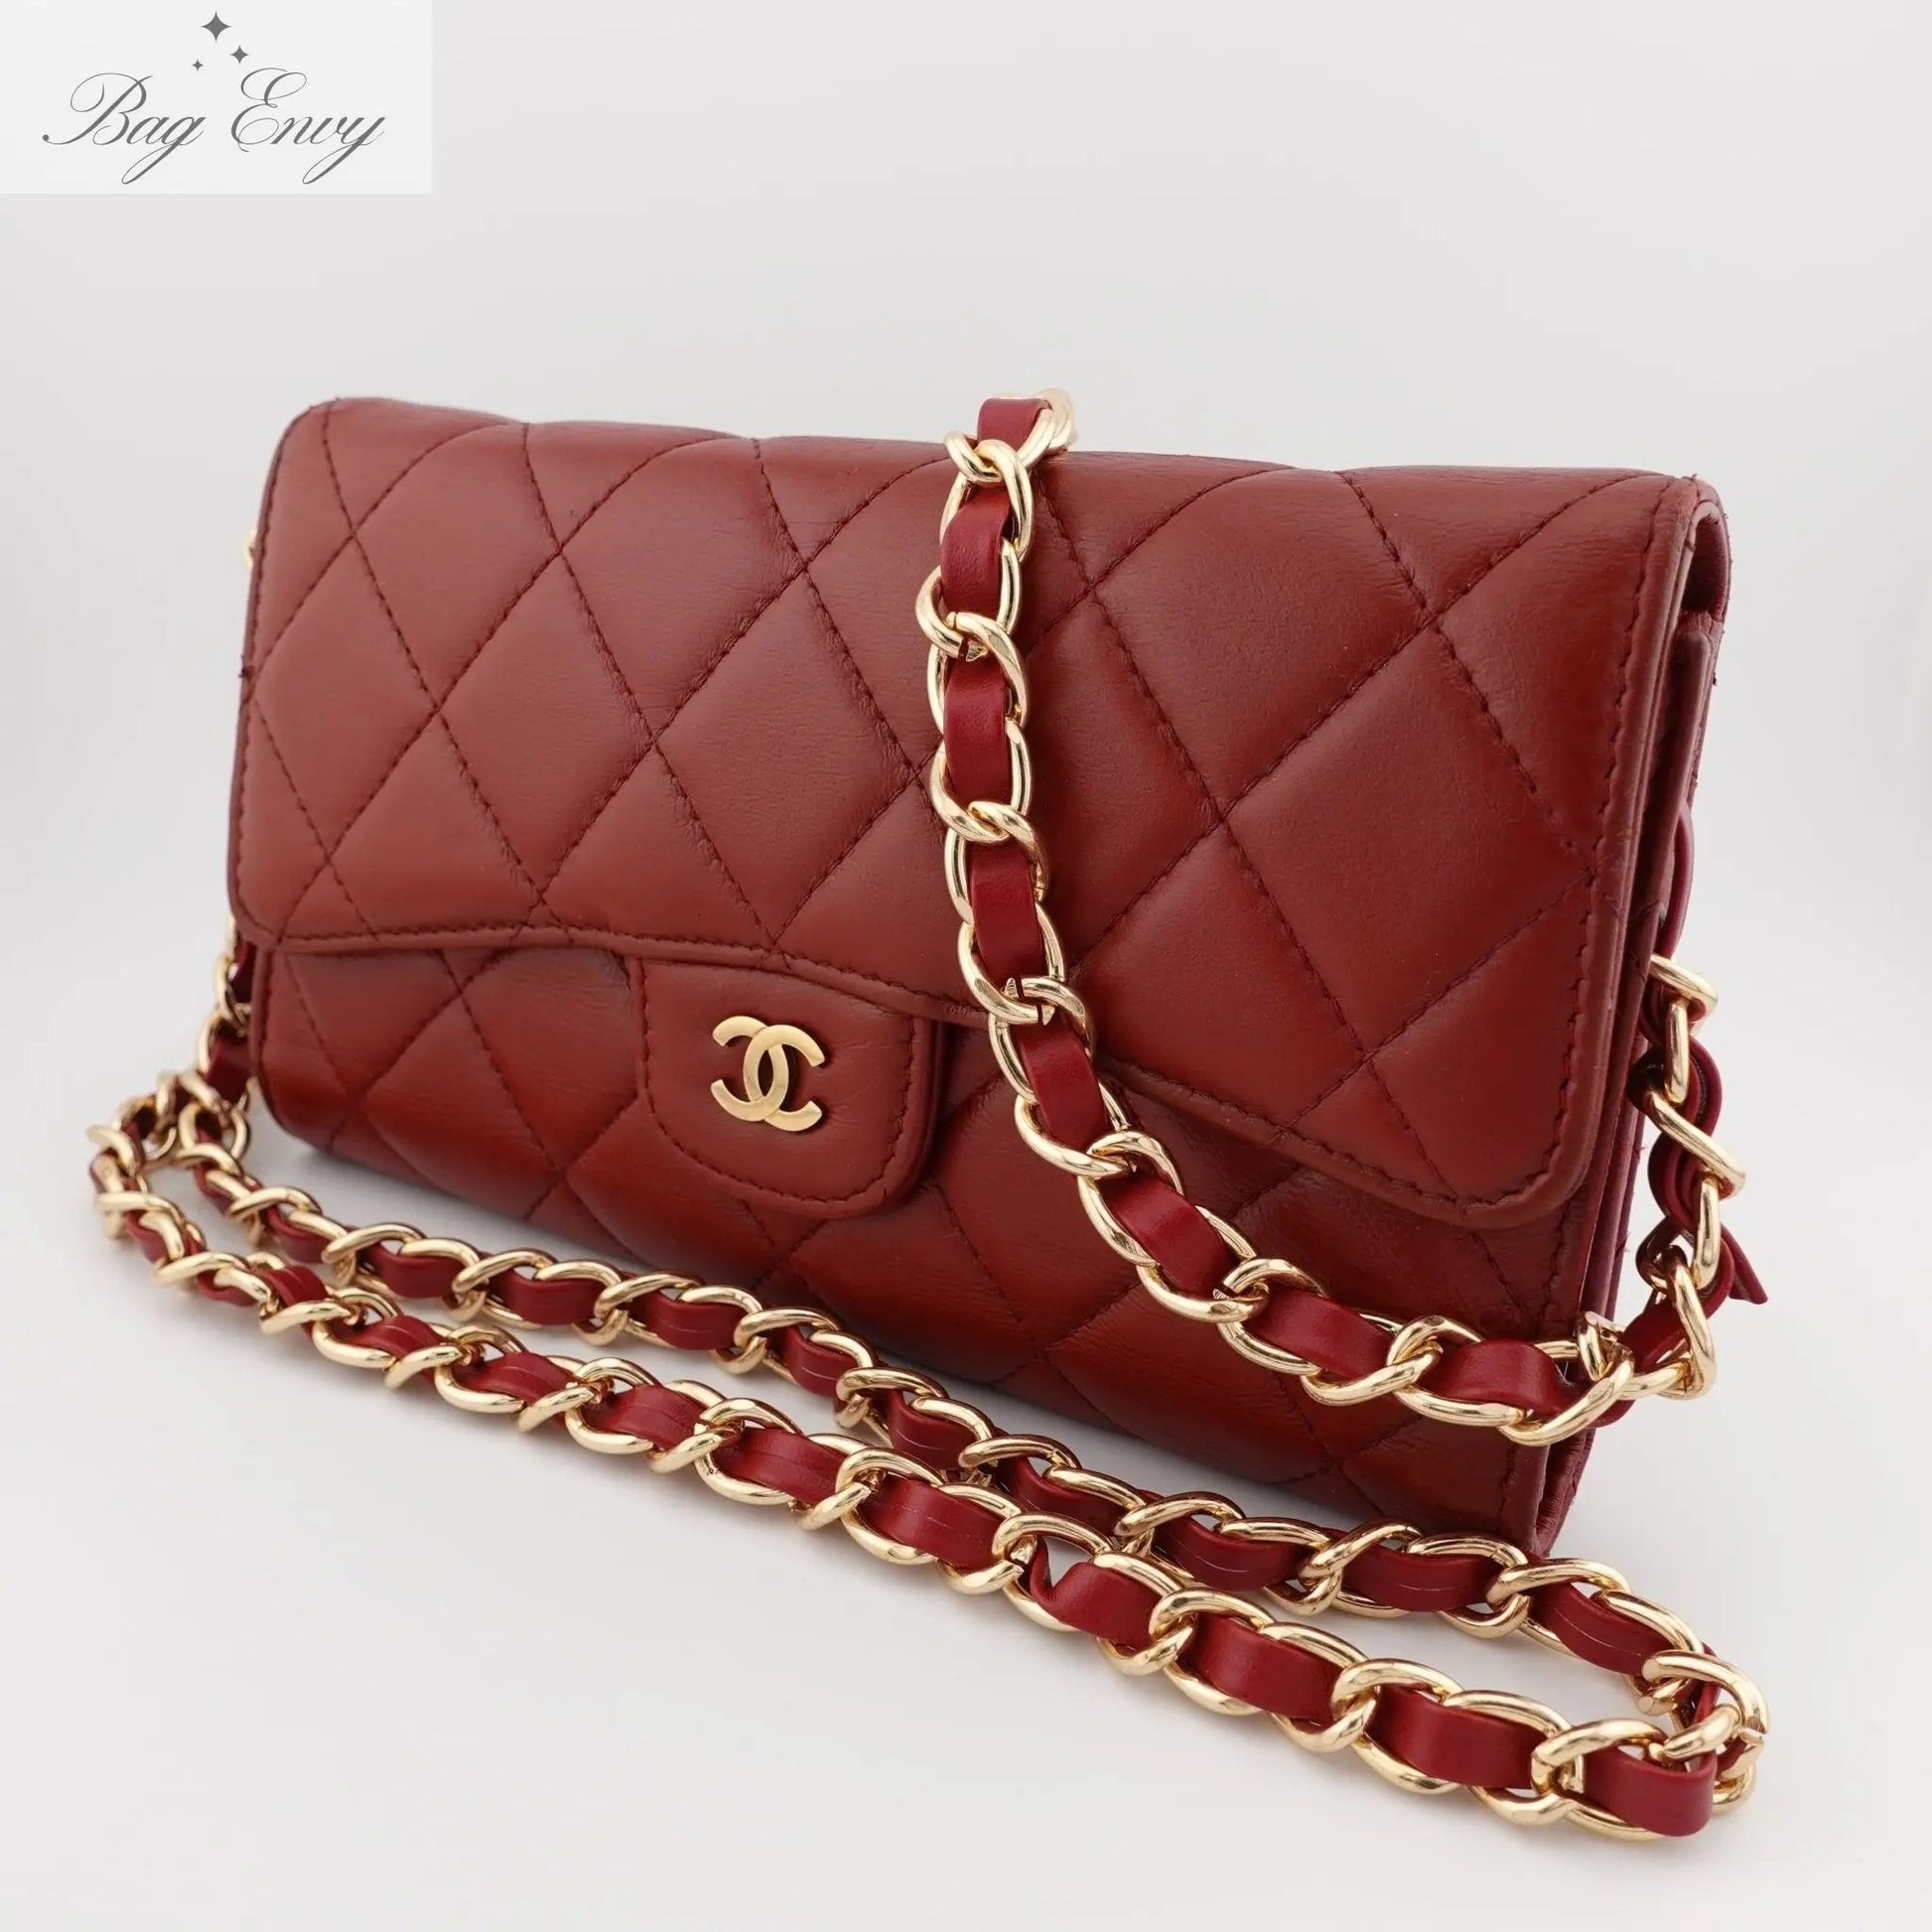 CHANEL Lambskin Classic Flap Wallet With Chain - Bag Envy